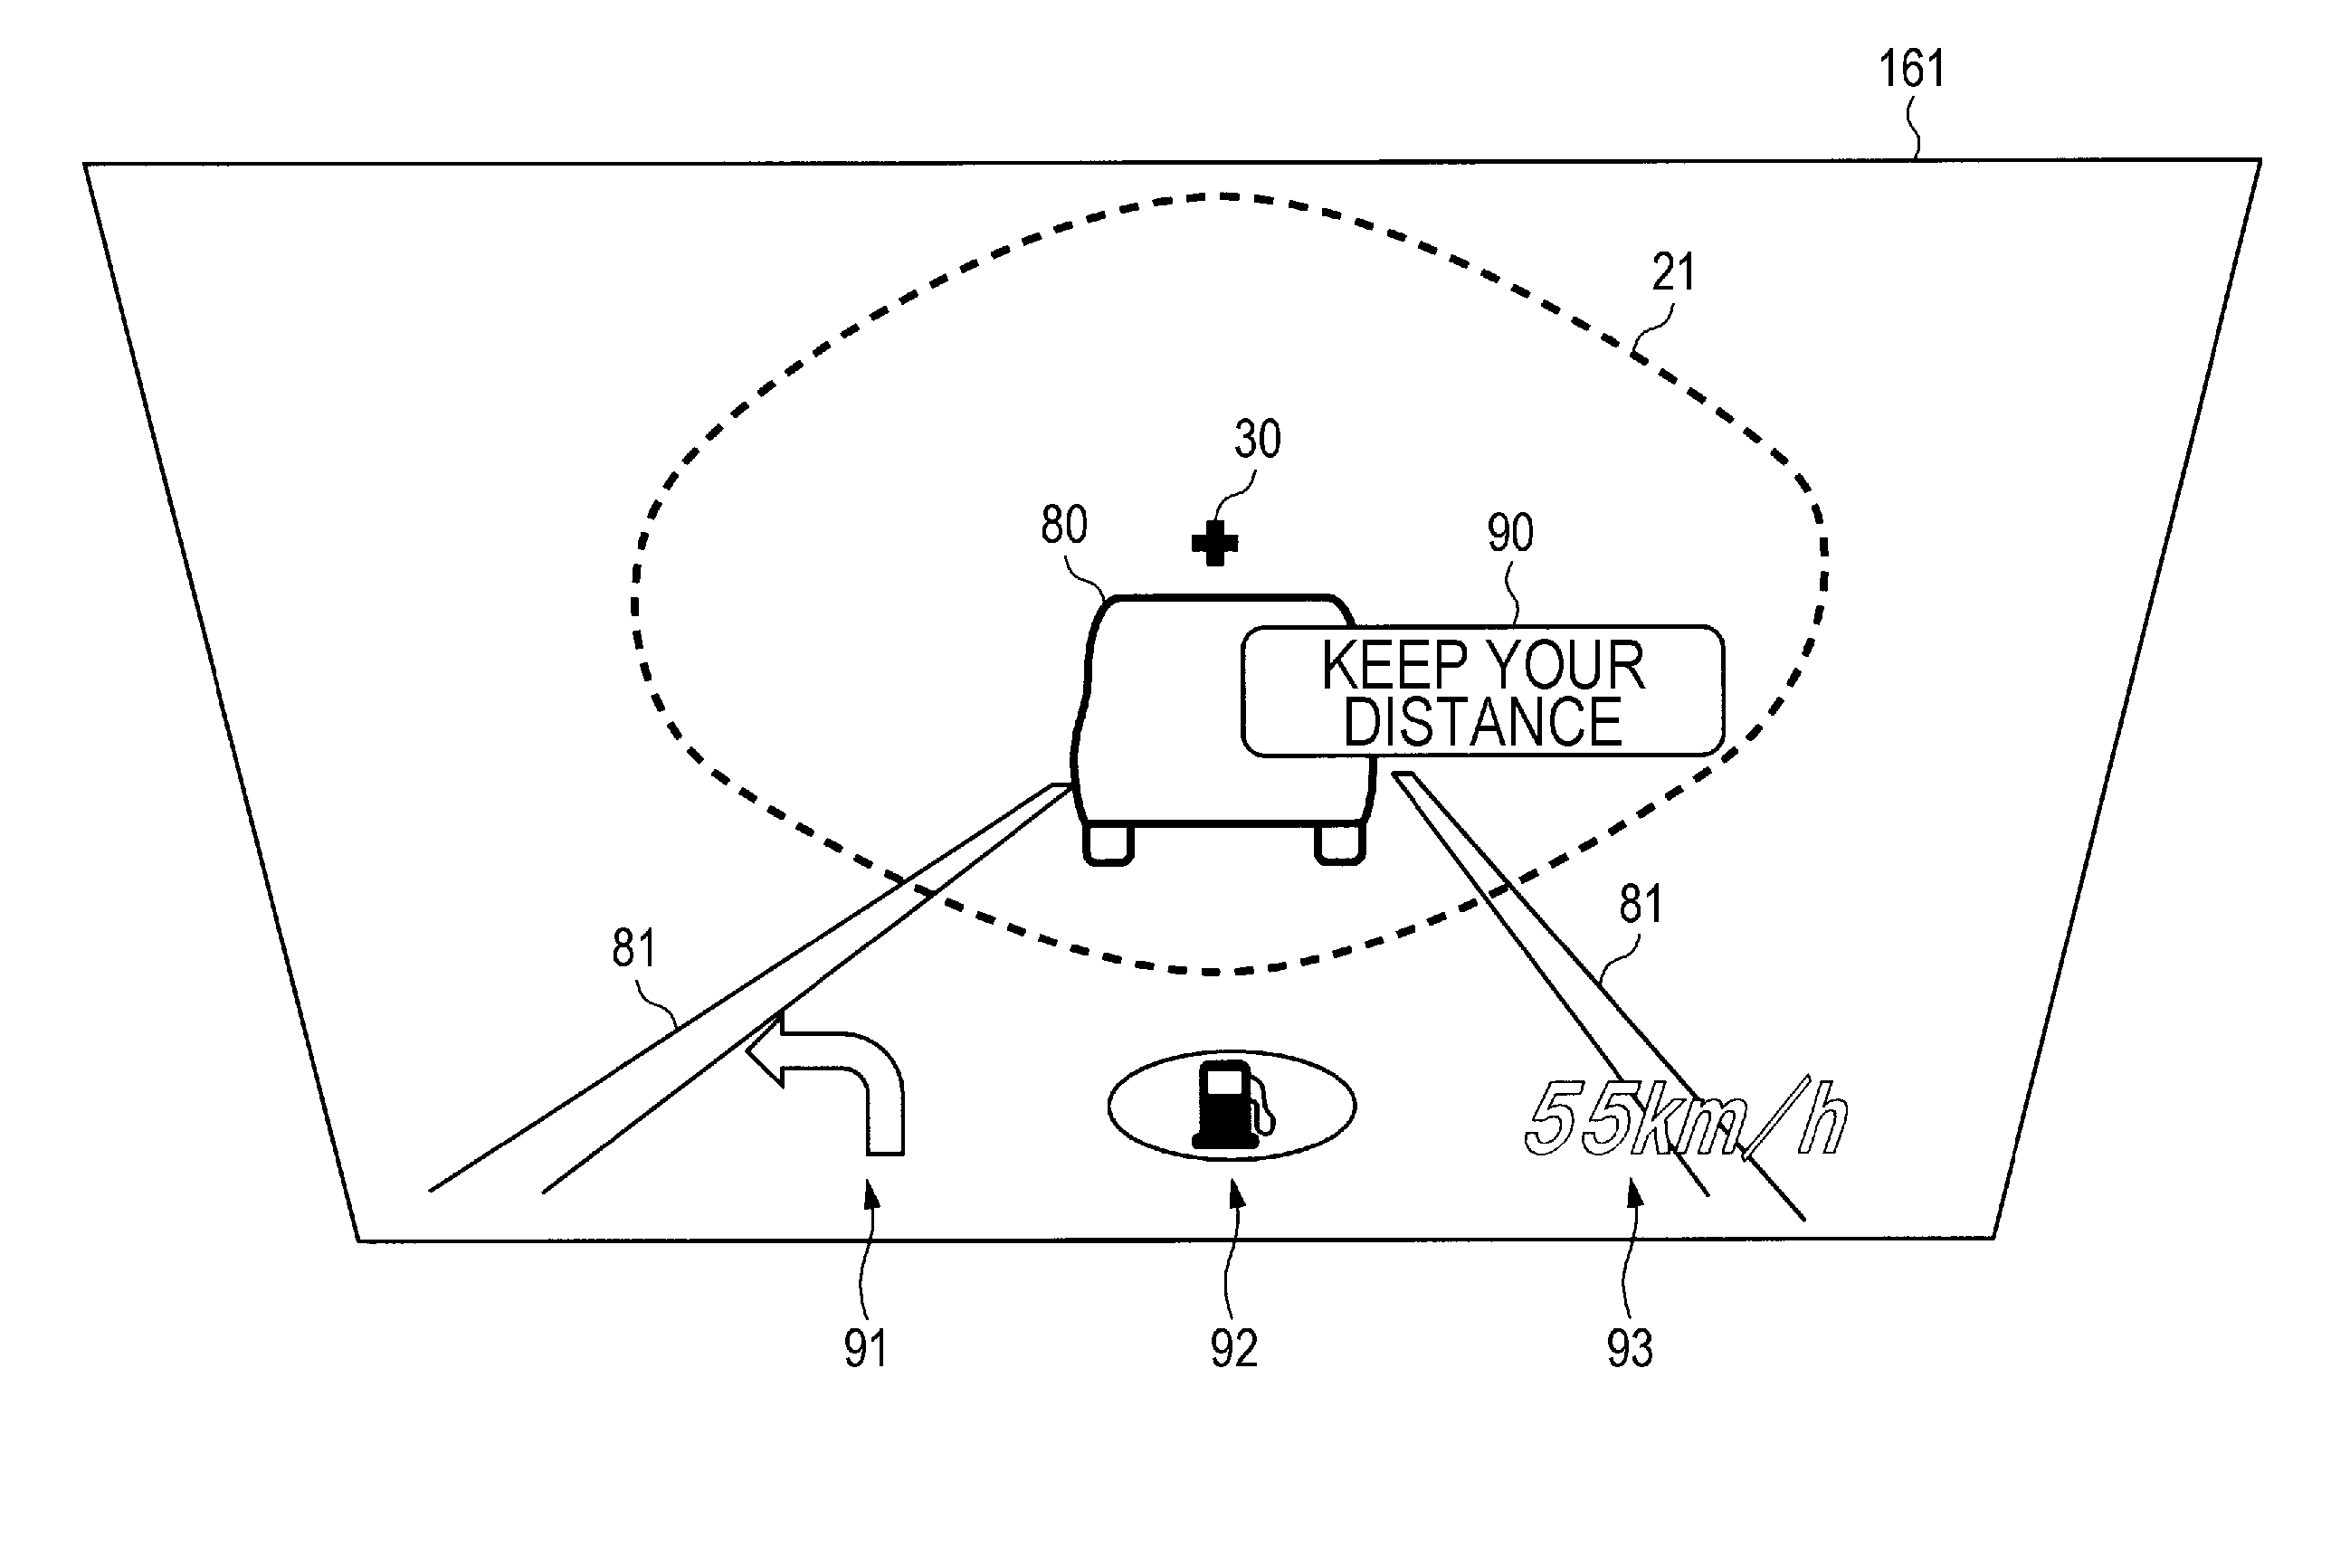 Visual field calculation apparatus and method for calculating visual field